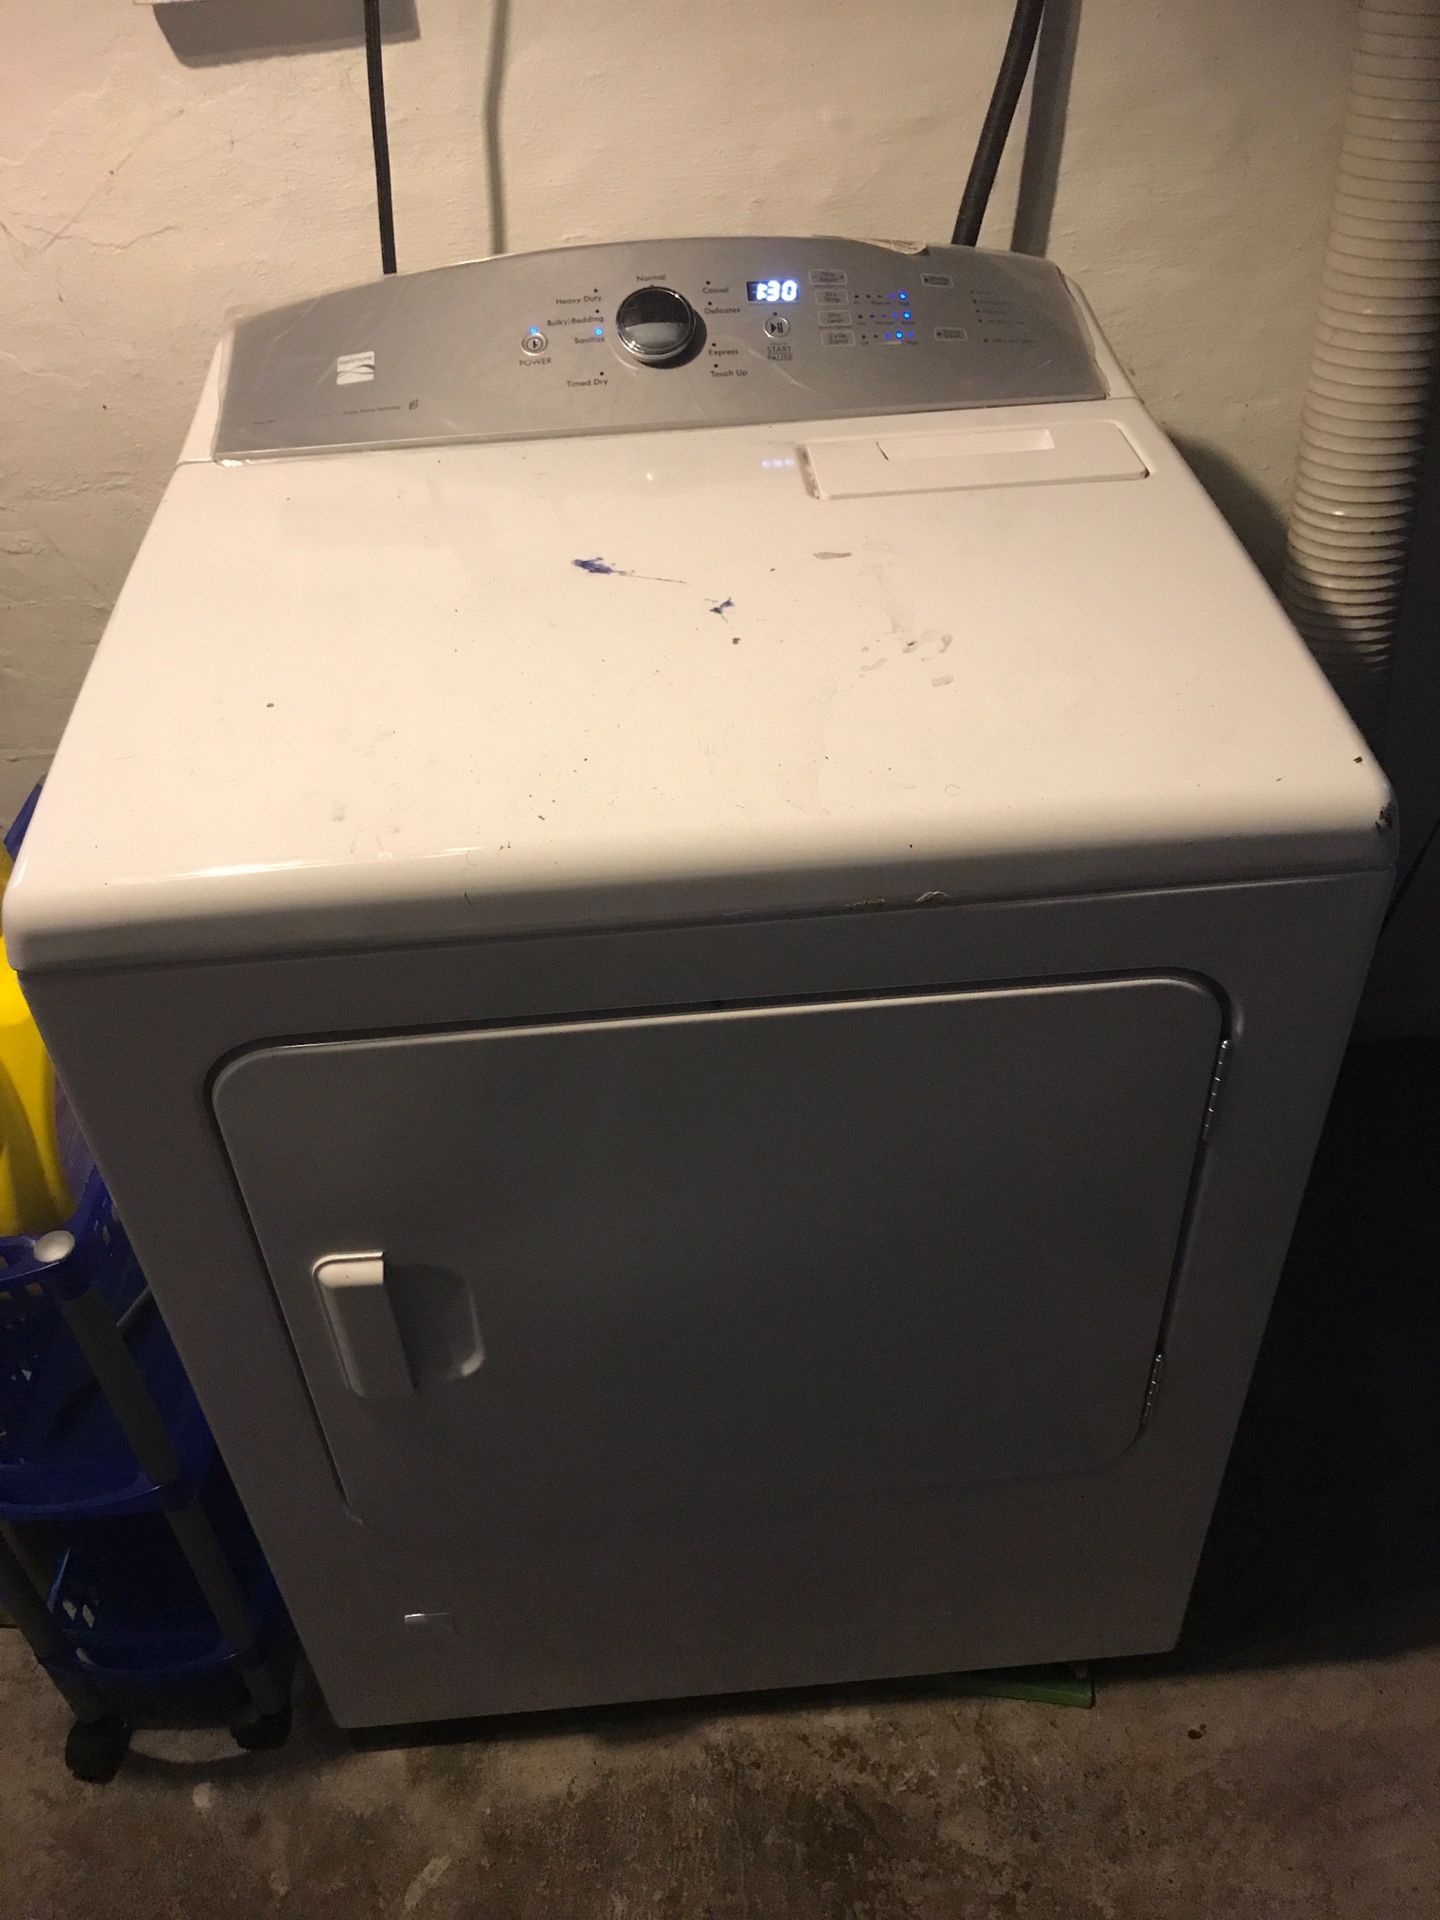 Kenmore washer and dryer very great condition I went down a lot will be sold for the the price of $450 nothing lower it’s a gas dryer... Thanks !!